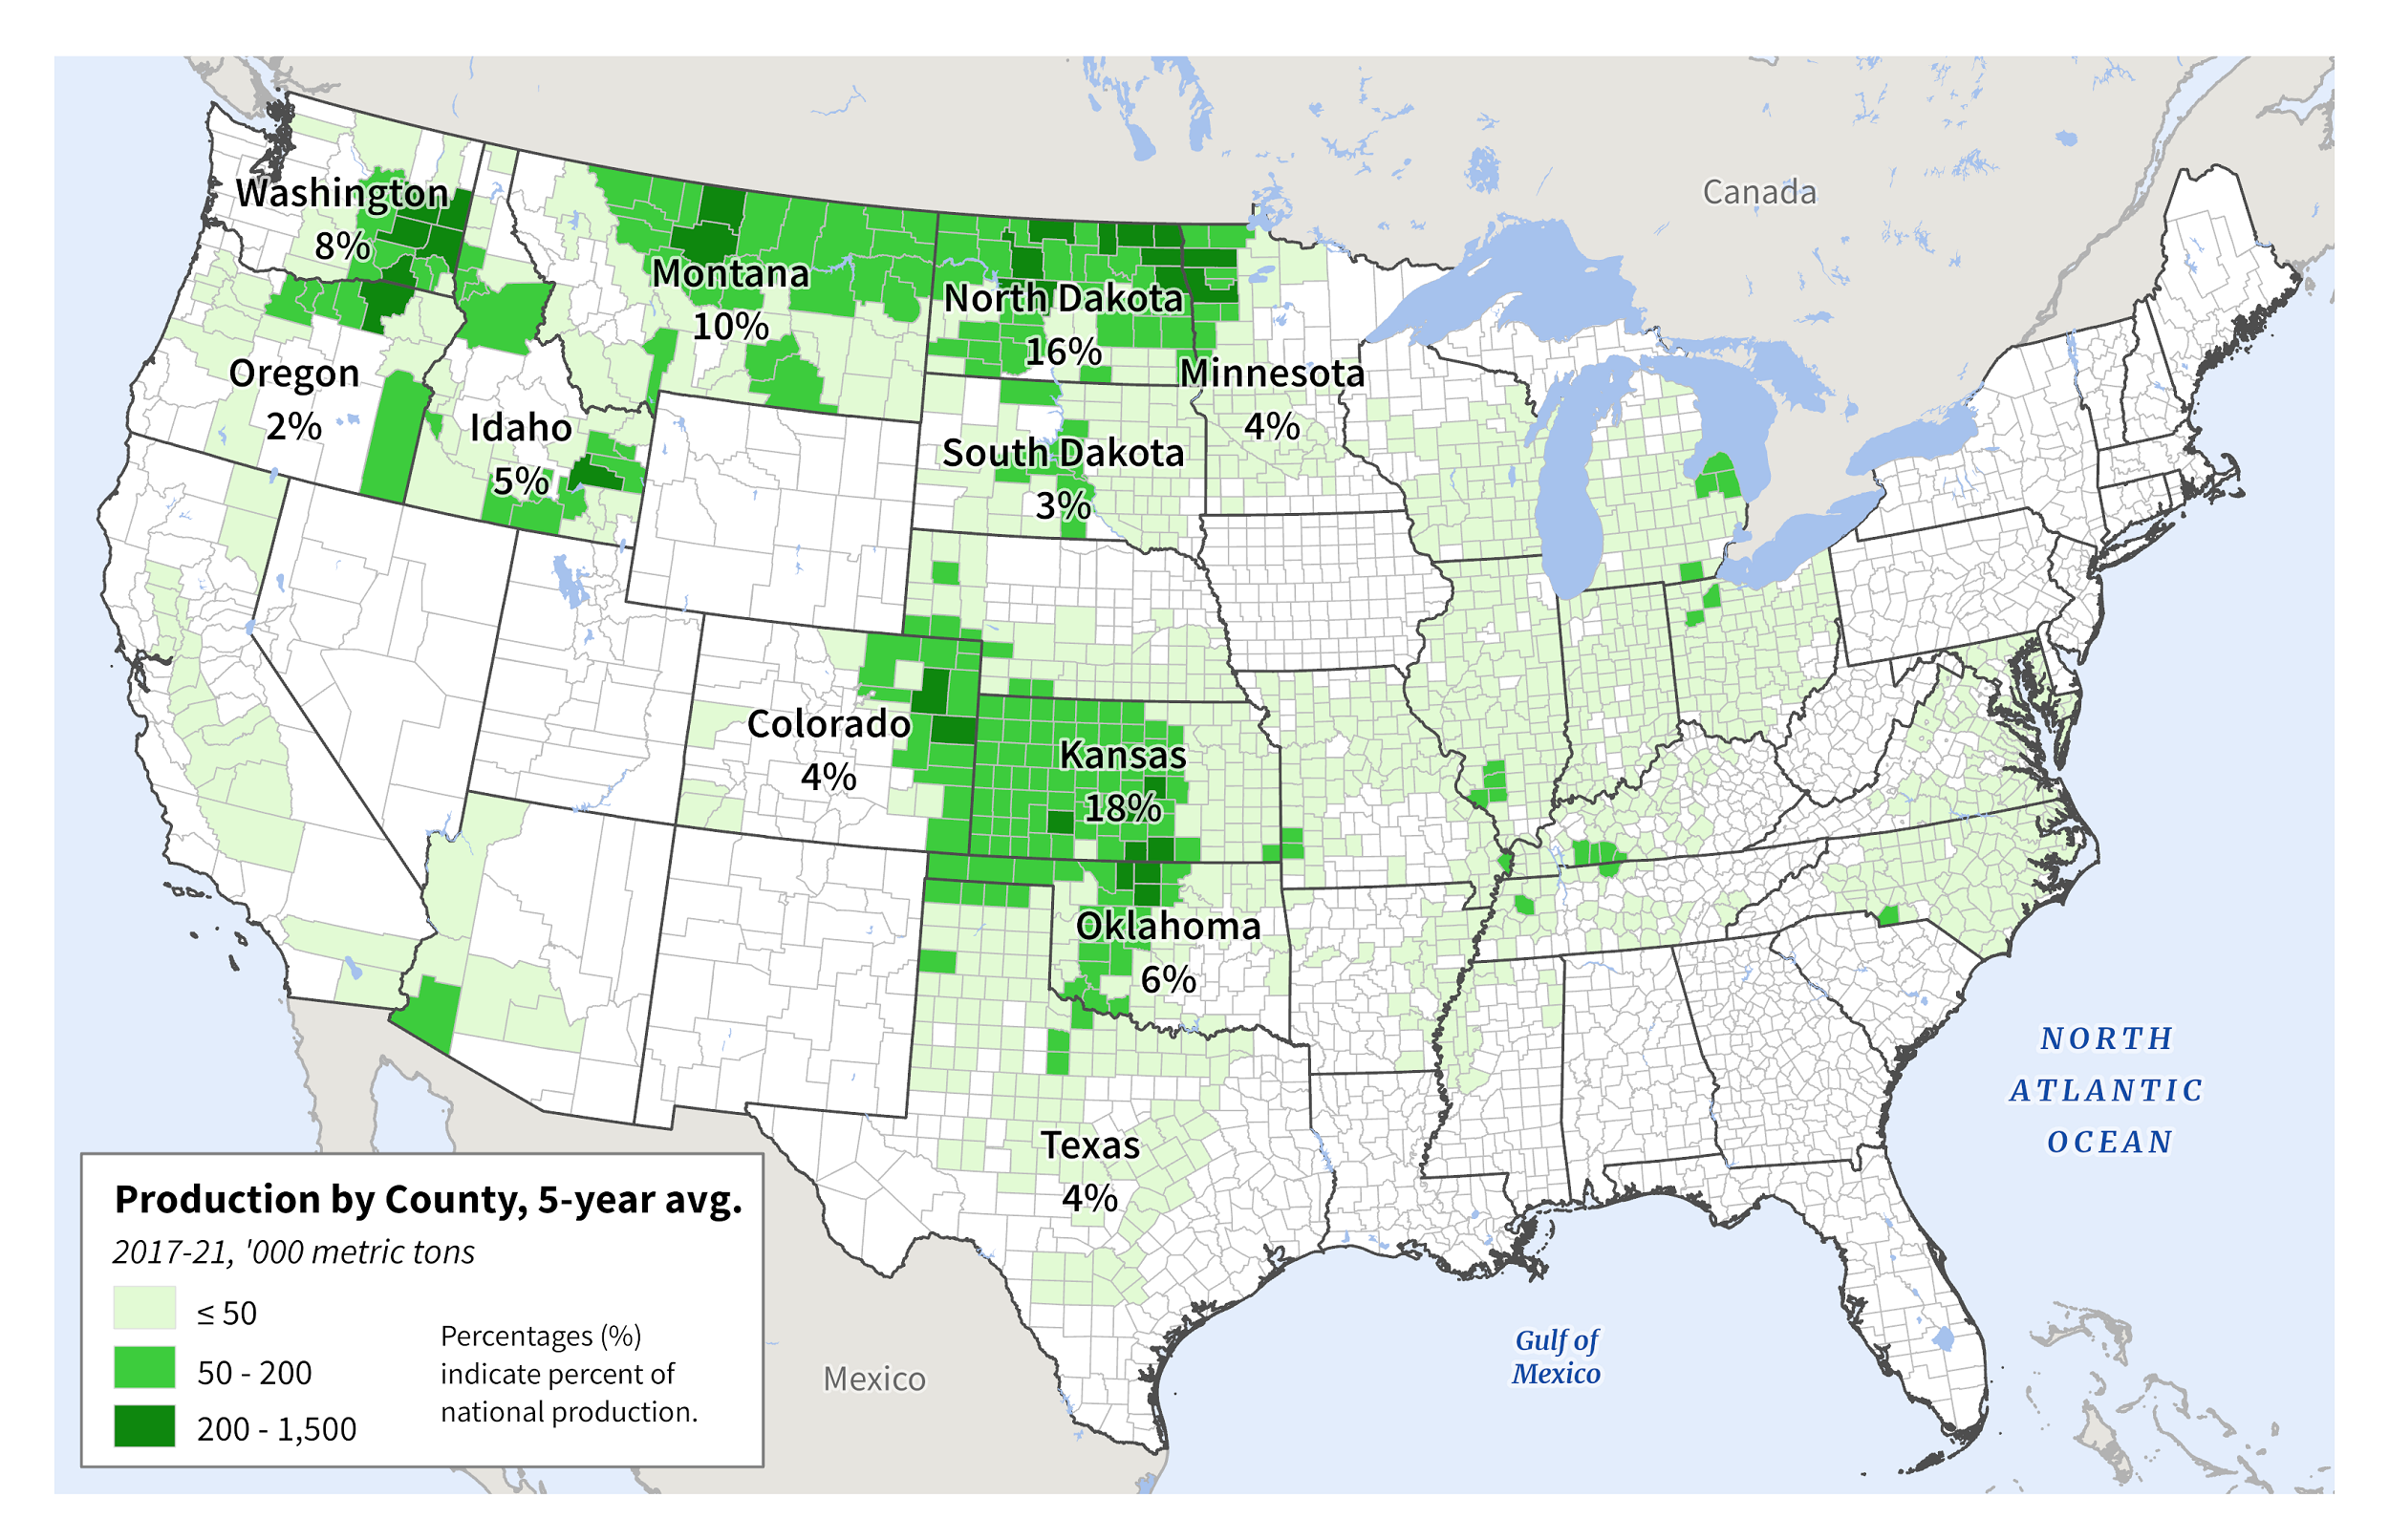 U.S Agriculture Map 2017-2021